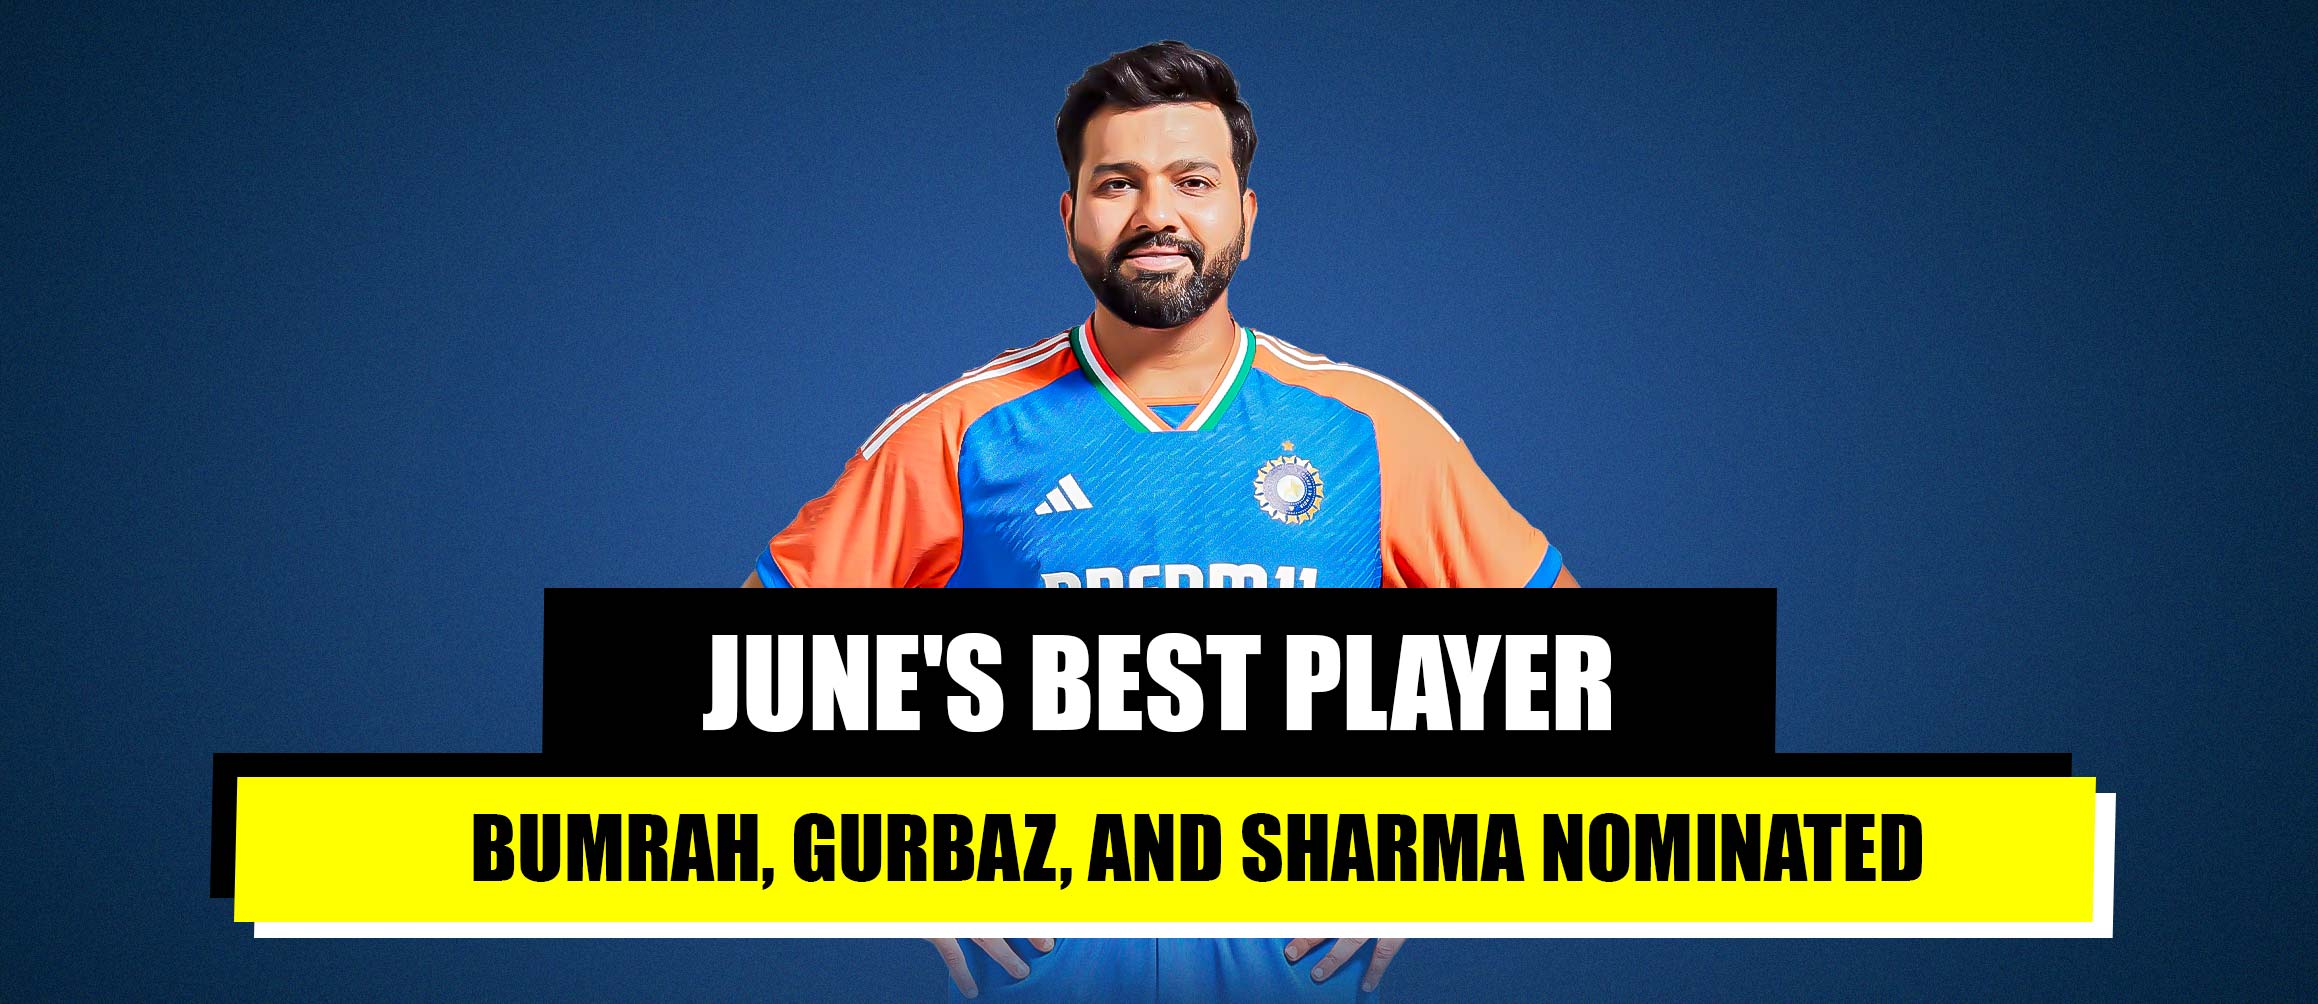 June’s Best Player: Bumrah, Gurbaz, and Sharma Nominated